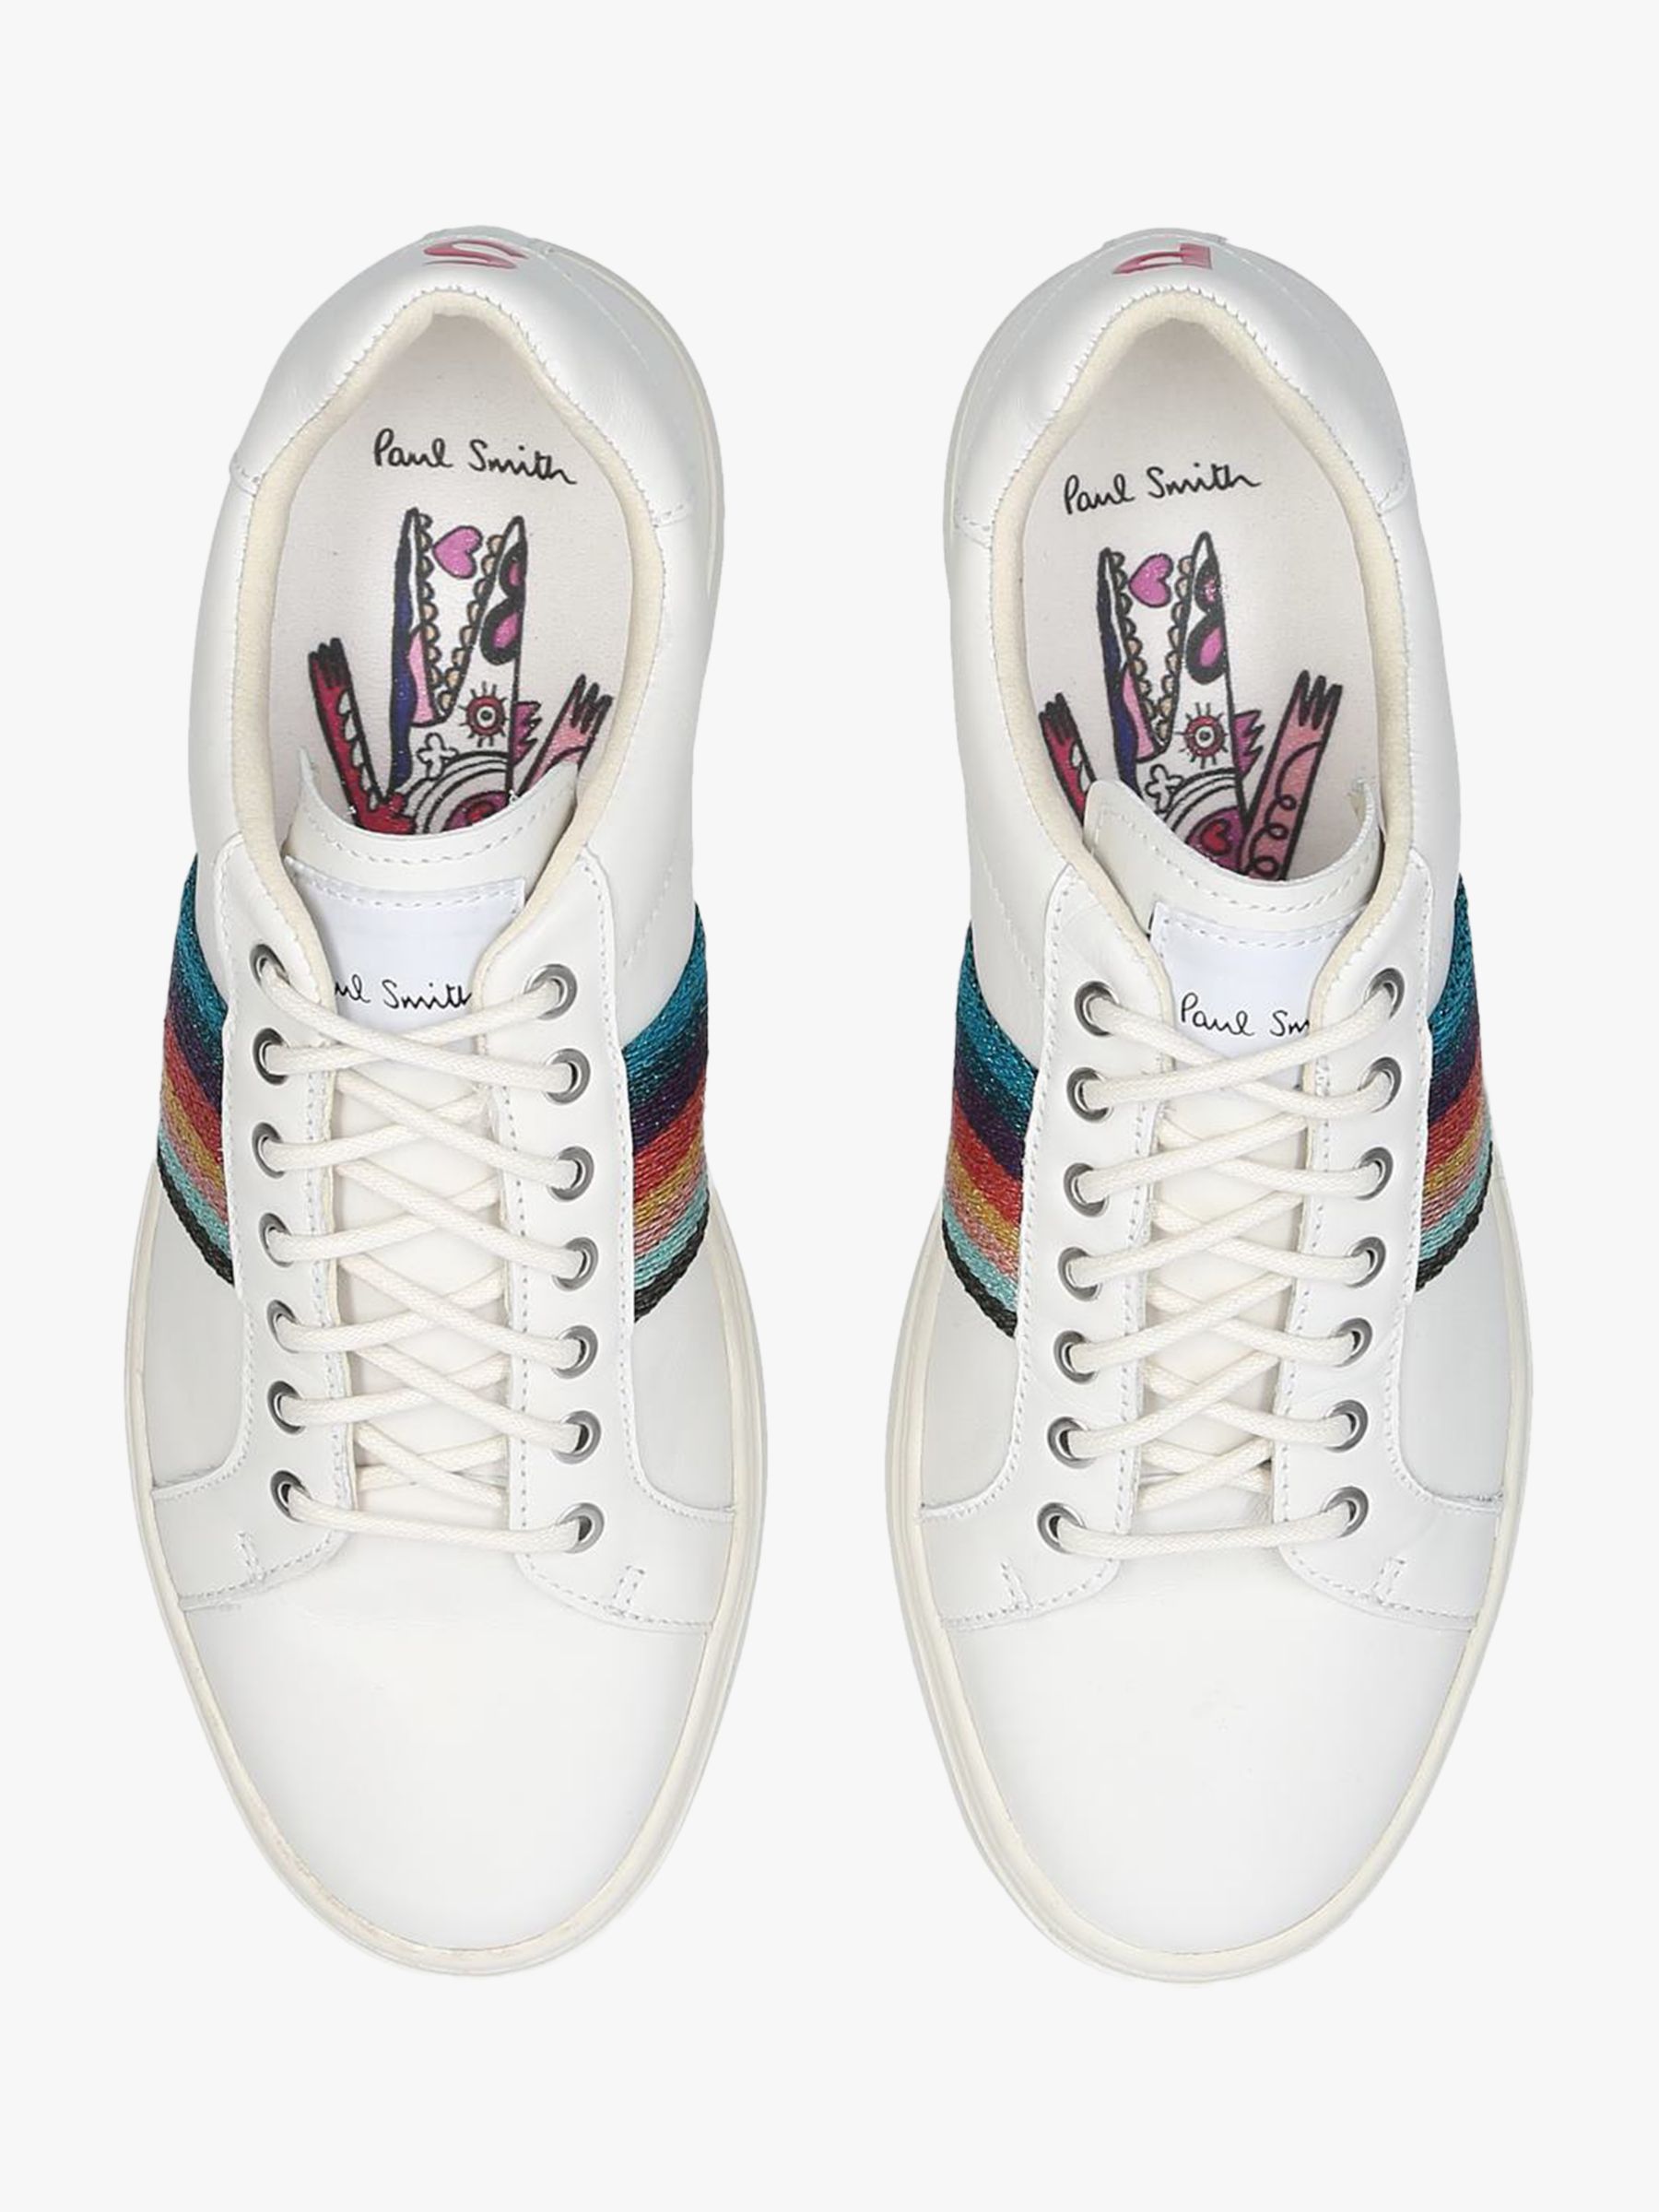 Paul Smith Lapin Stripe Lace Up 